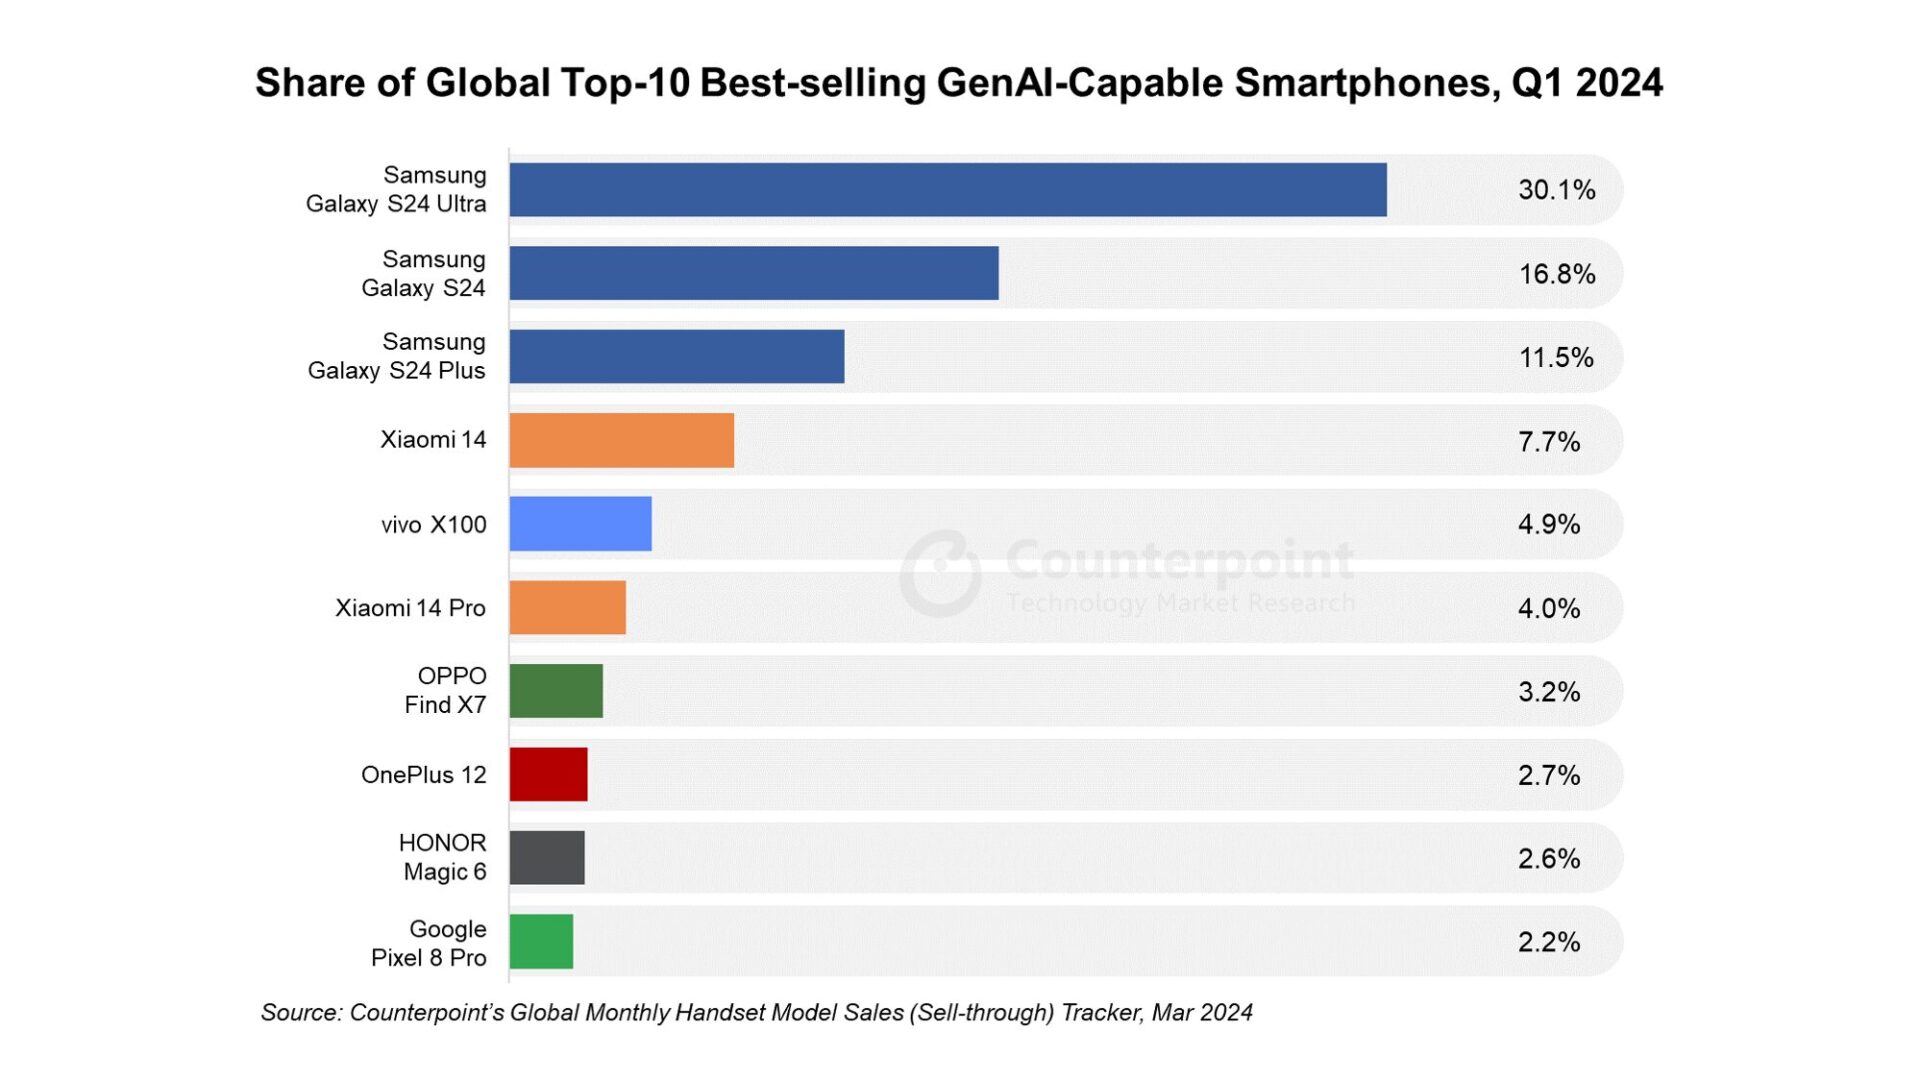 Share of Global Top-10 Best-selling GenAI-Capable Smartphone, Q1 2024